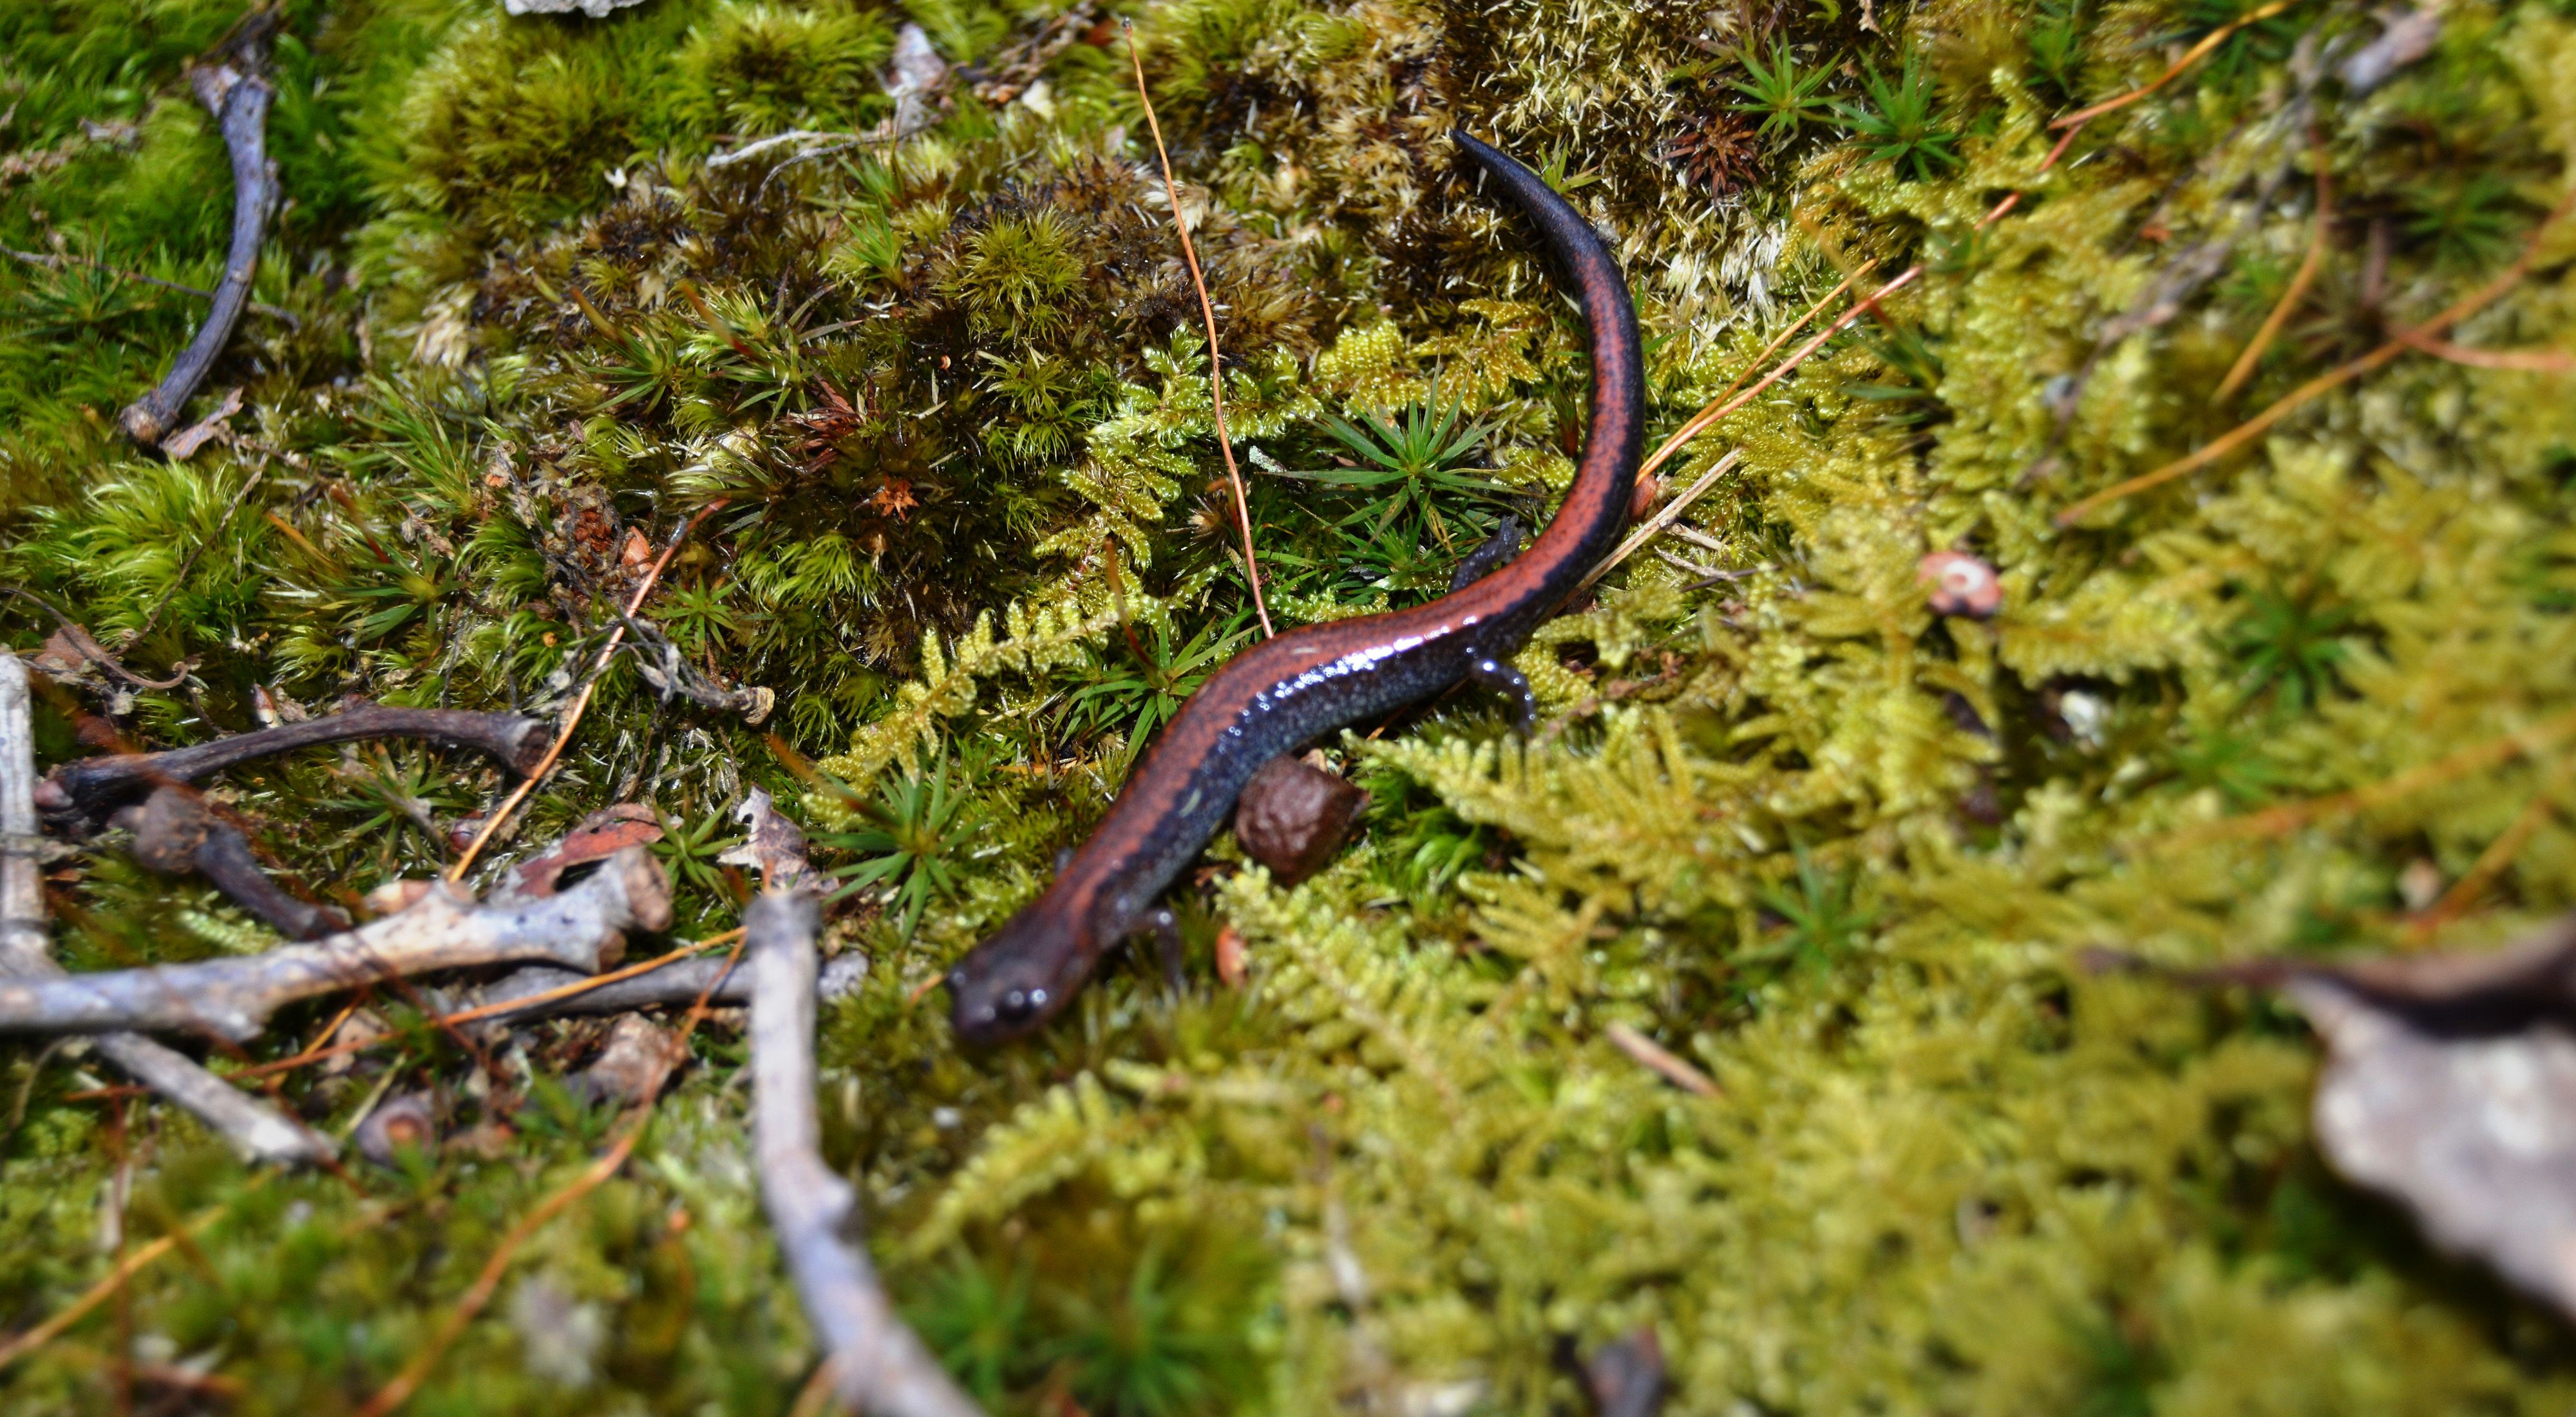 Close up view of a red backed salamander. A small black amphibian with a red stripe running down the length of its back and tail. It sits nestled amongst green moss and small twigs.